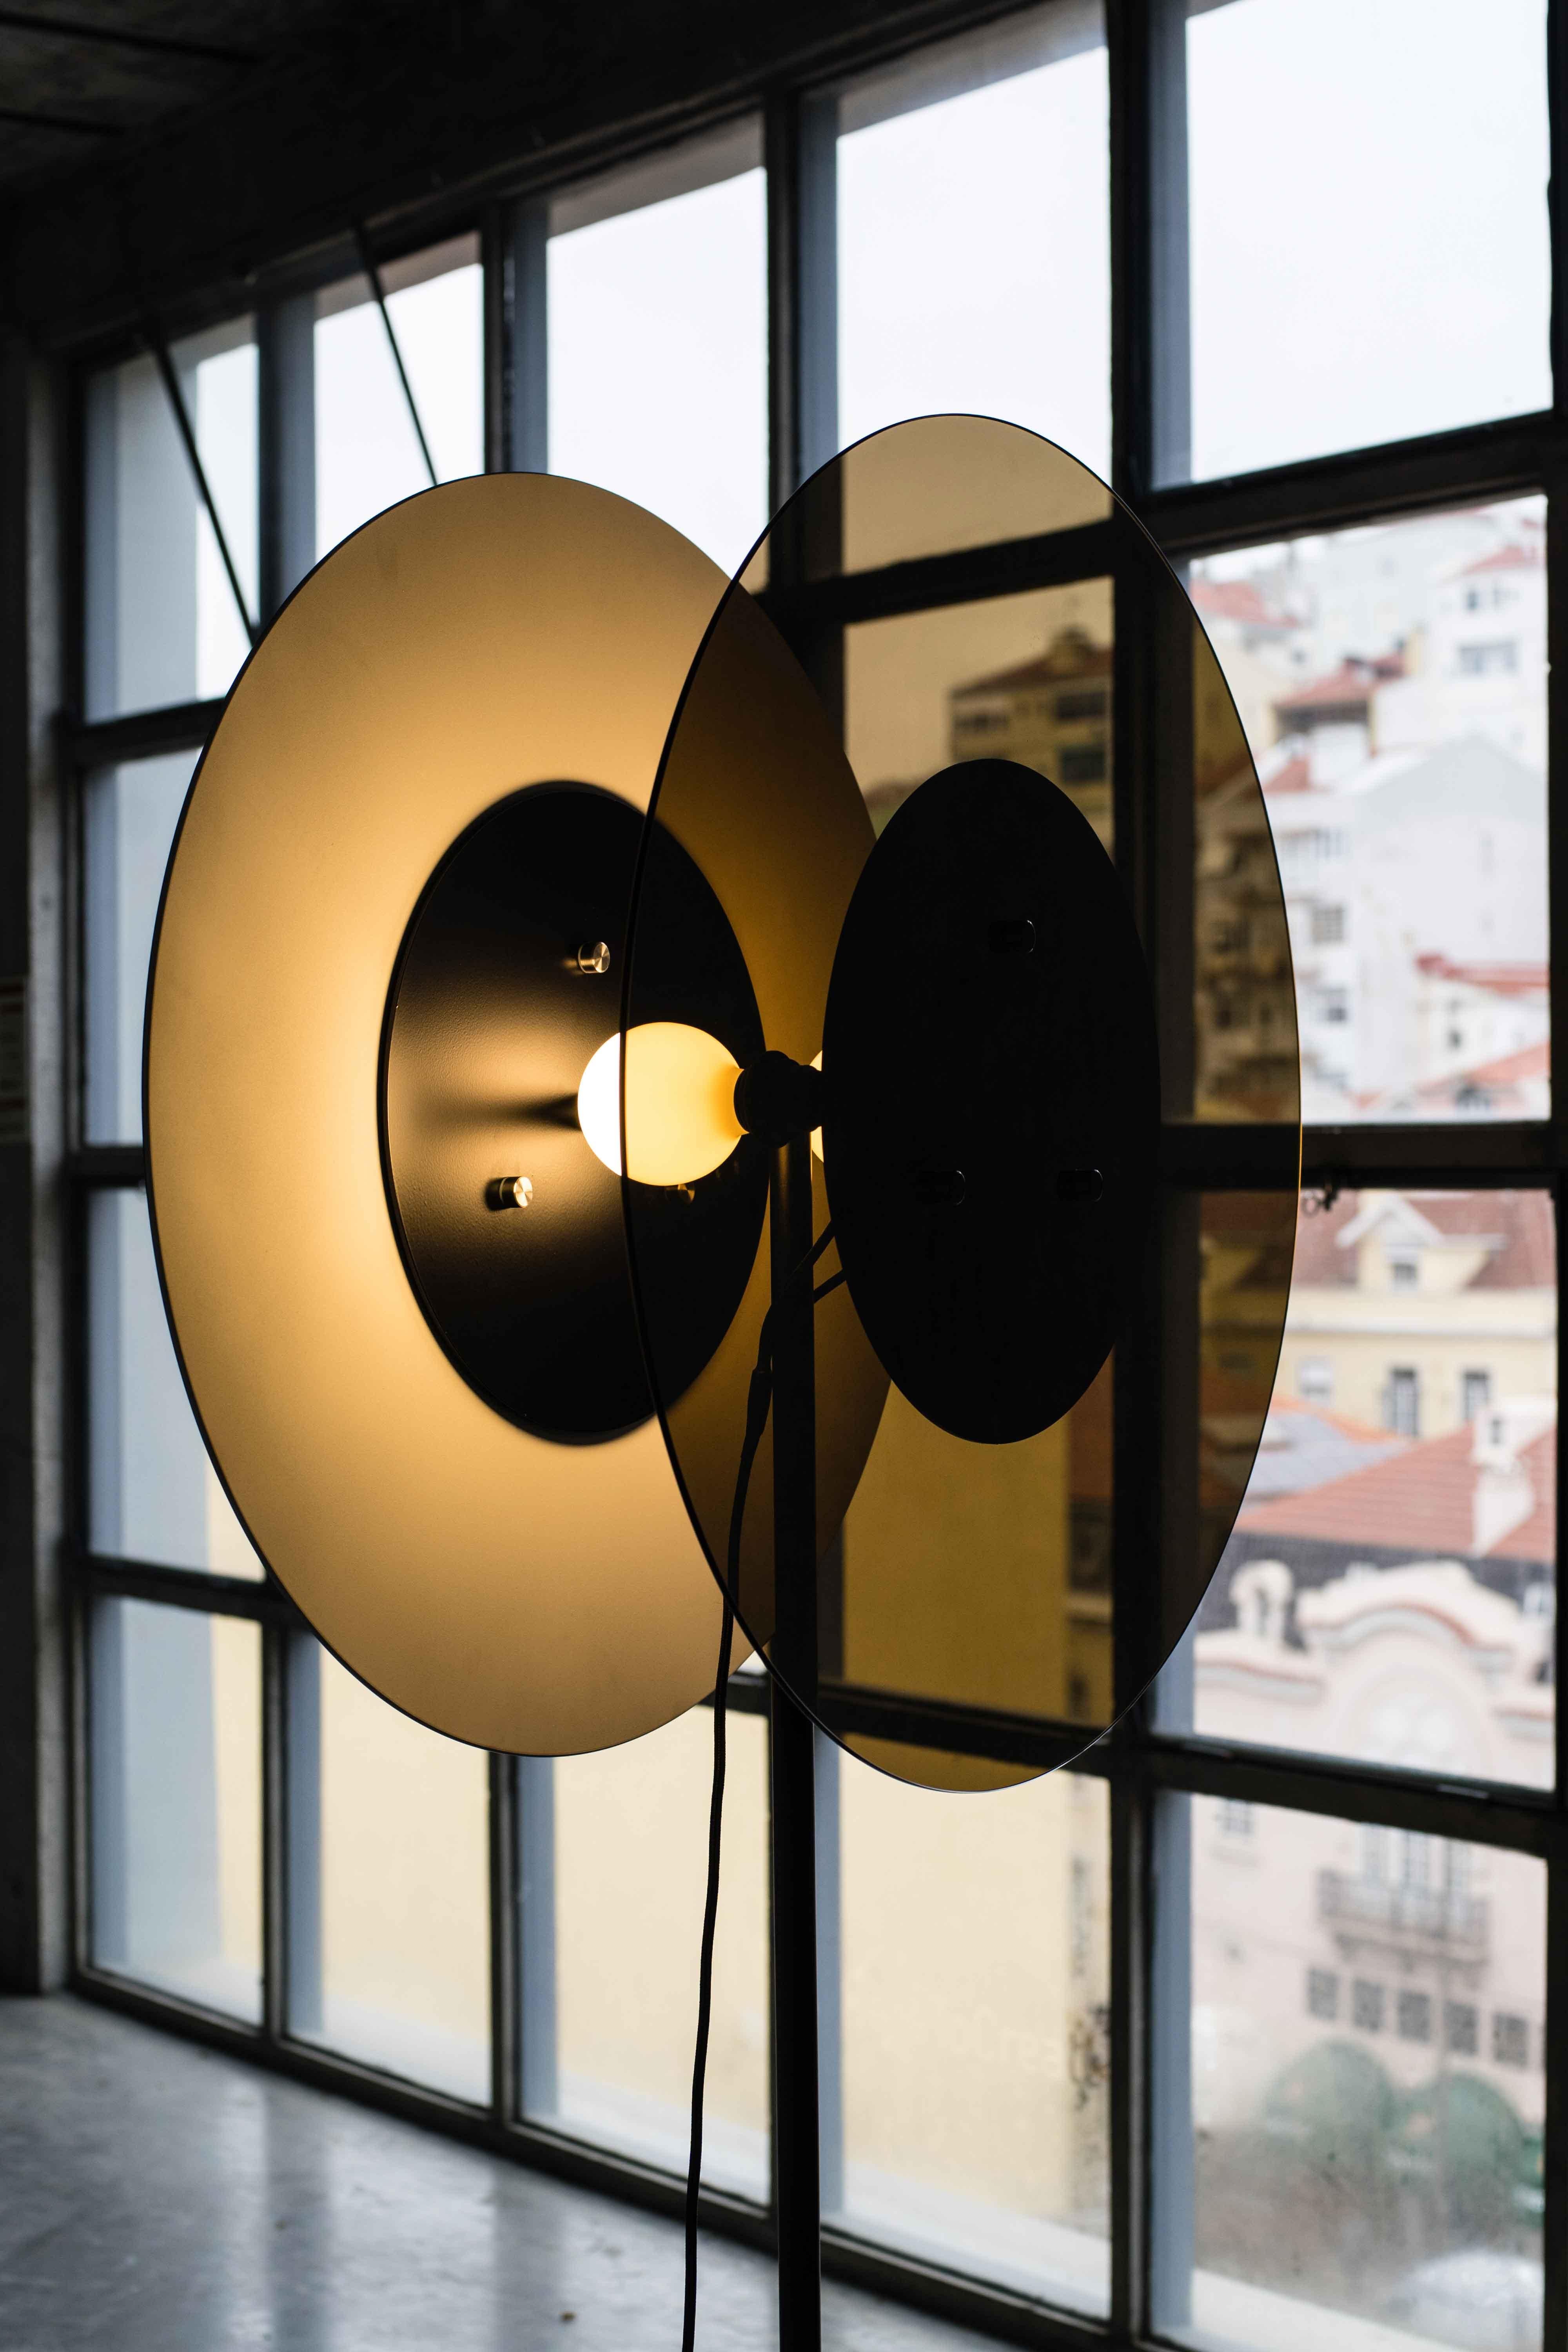 A beam of light is contained in two oval walls who rises like a silent lighthouse in the space. This lamp not only illuminates but also casts its shadow where light does not come out. The intermediate space allows light to flow like a halo, which